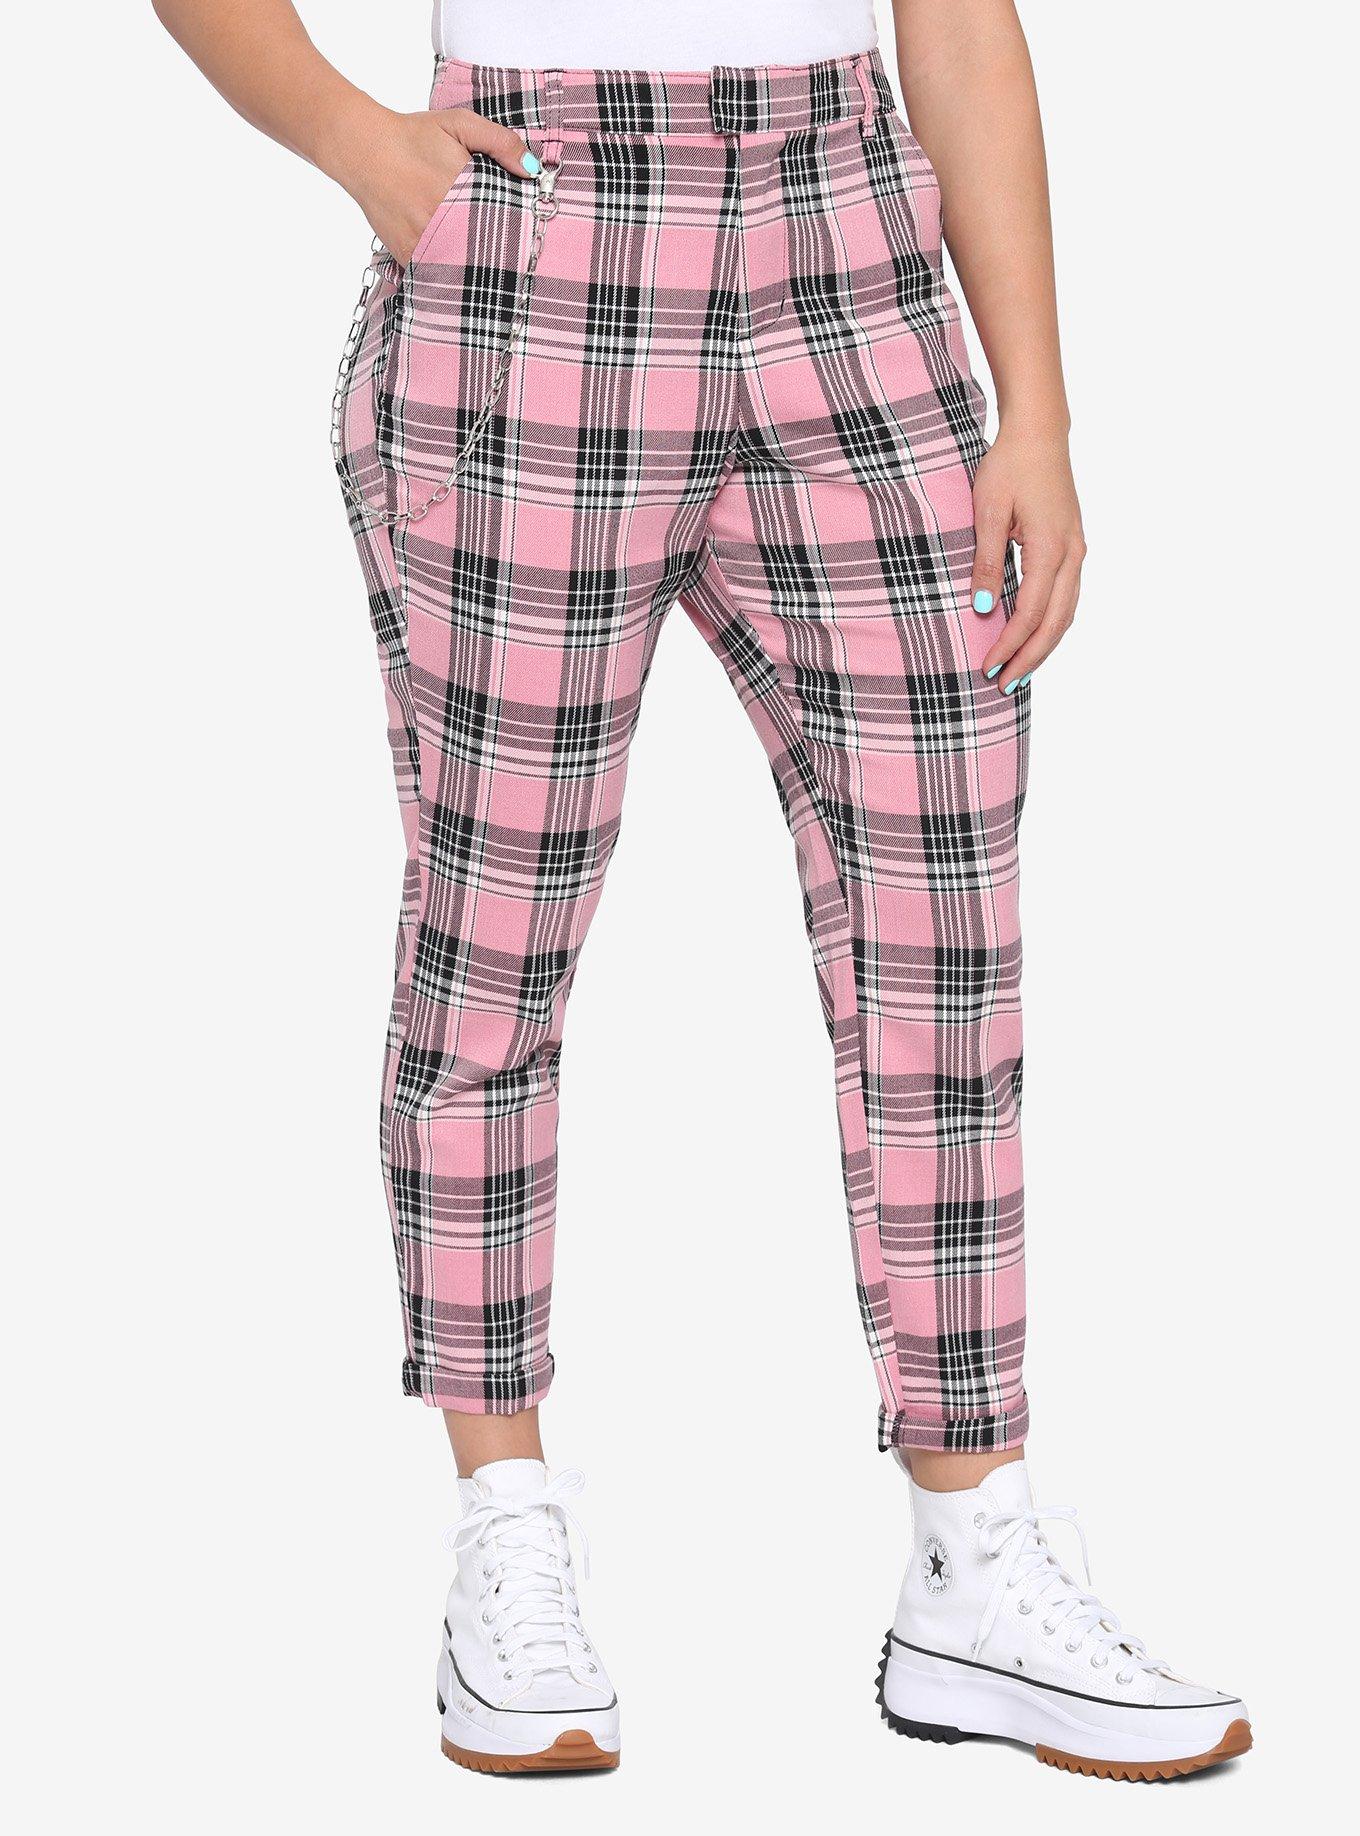 Hot Topic Plaid Pants Black White Chain Retro Y2k Academia Women's Size XS  - $20 - From Den